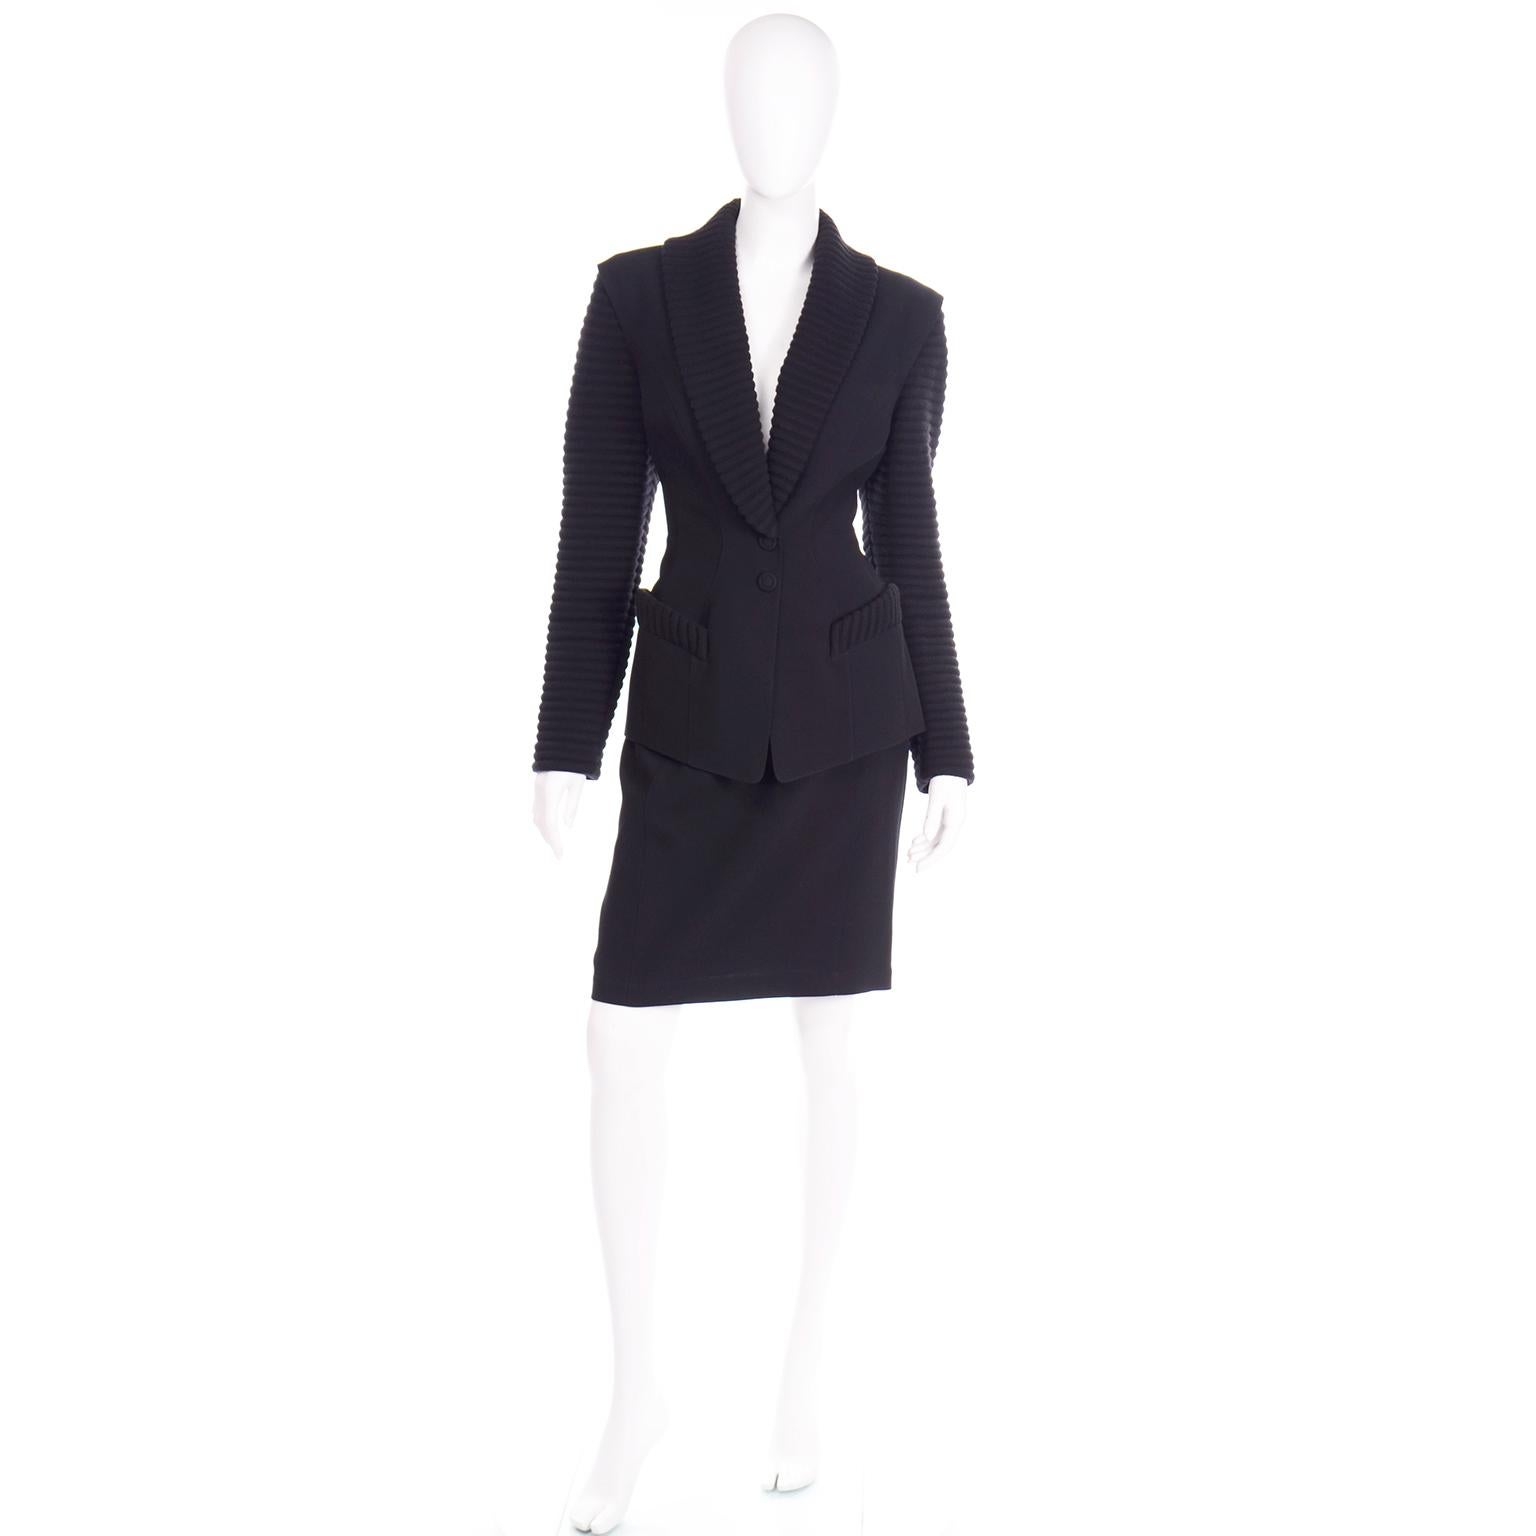 This is a fabulous vintage Thierry Mugler suit with a black wool knit ribbed shawl collar jacket and a black wool pencil skirt. The sleeves,shawl collar,and the trim of the pockets are all in a ribbed knit. As with all of Thierry Mugler's suits, the